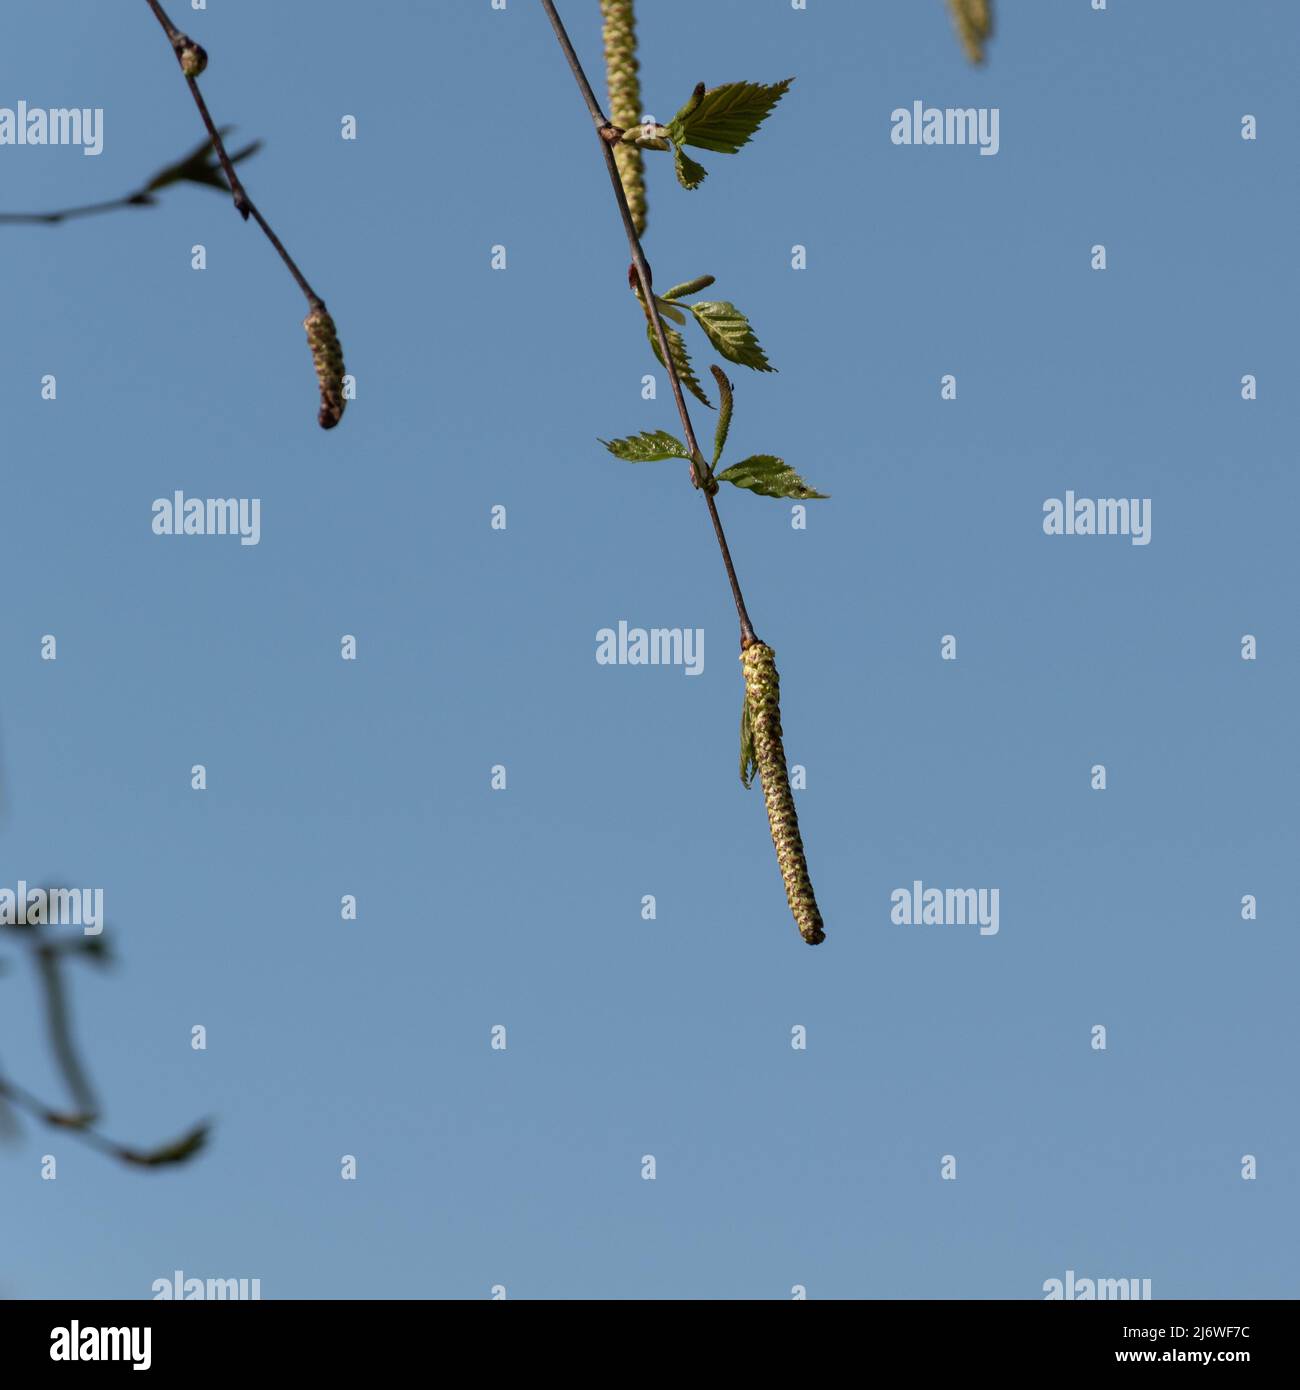 Birch catkin close up, twig with new leaves and pendulous catkin Stock Photo